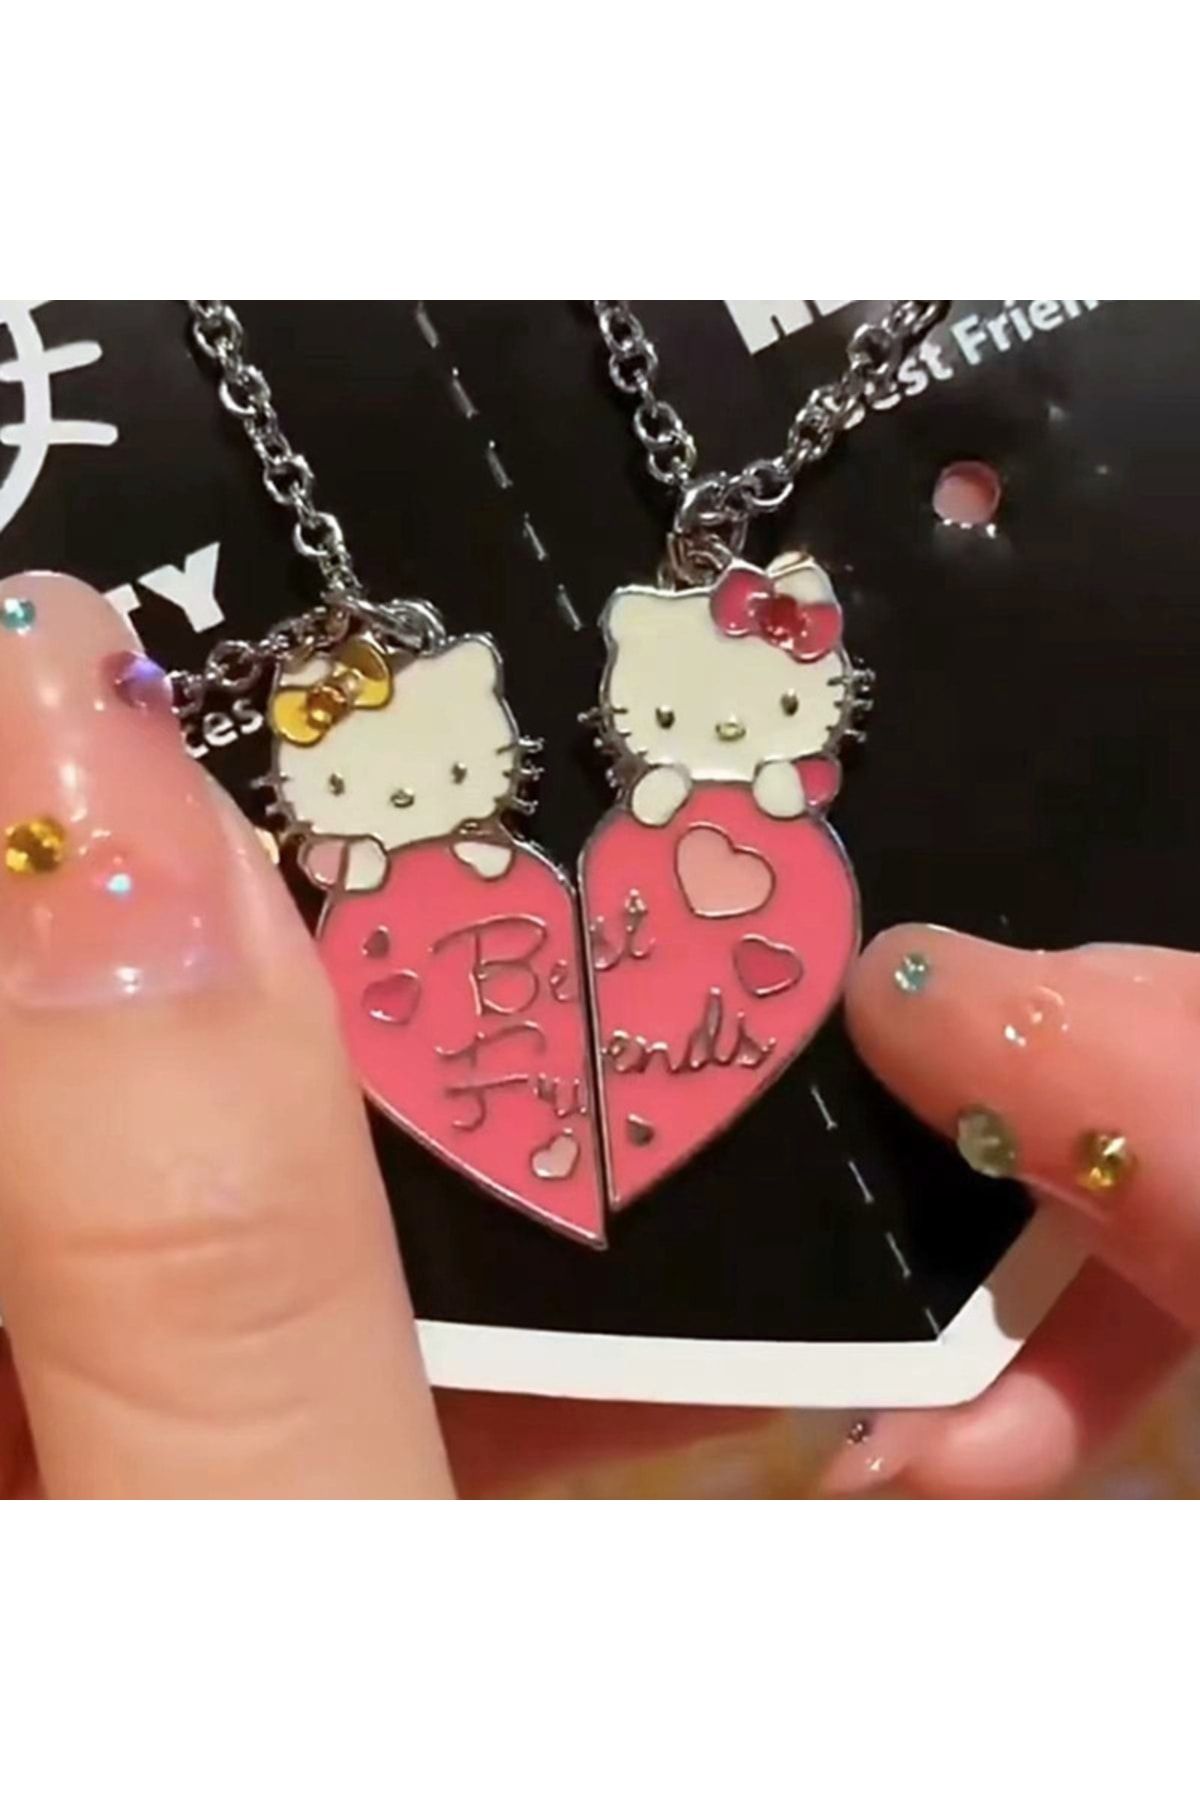 HELLO KITTY AND BRAT NECKLACES cute short necklaces... - Depop